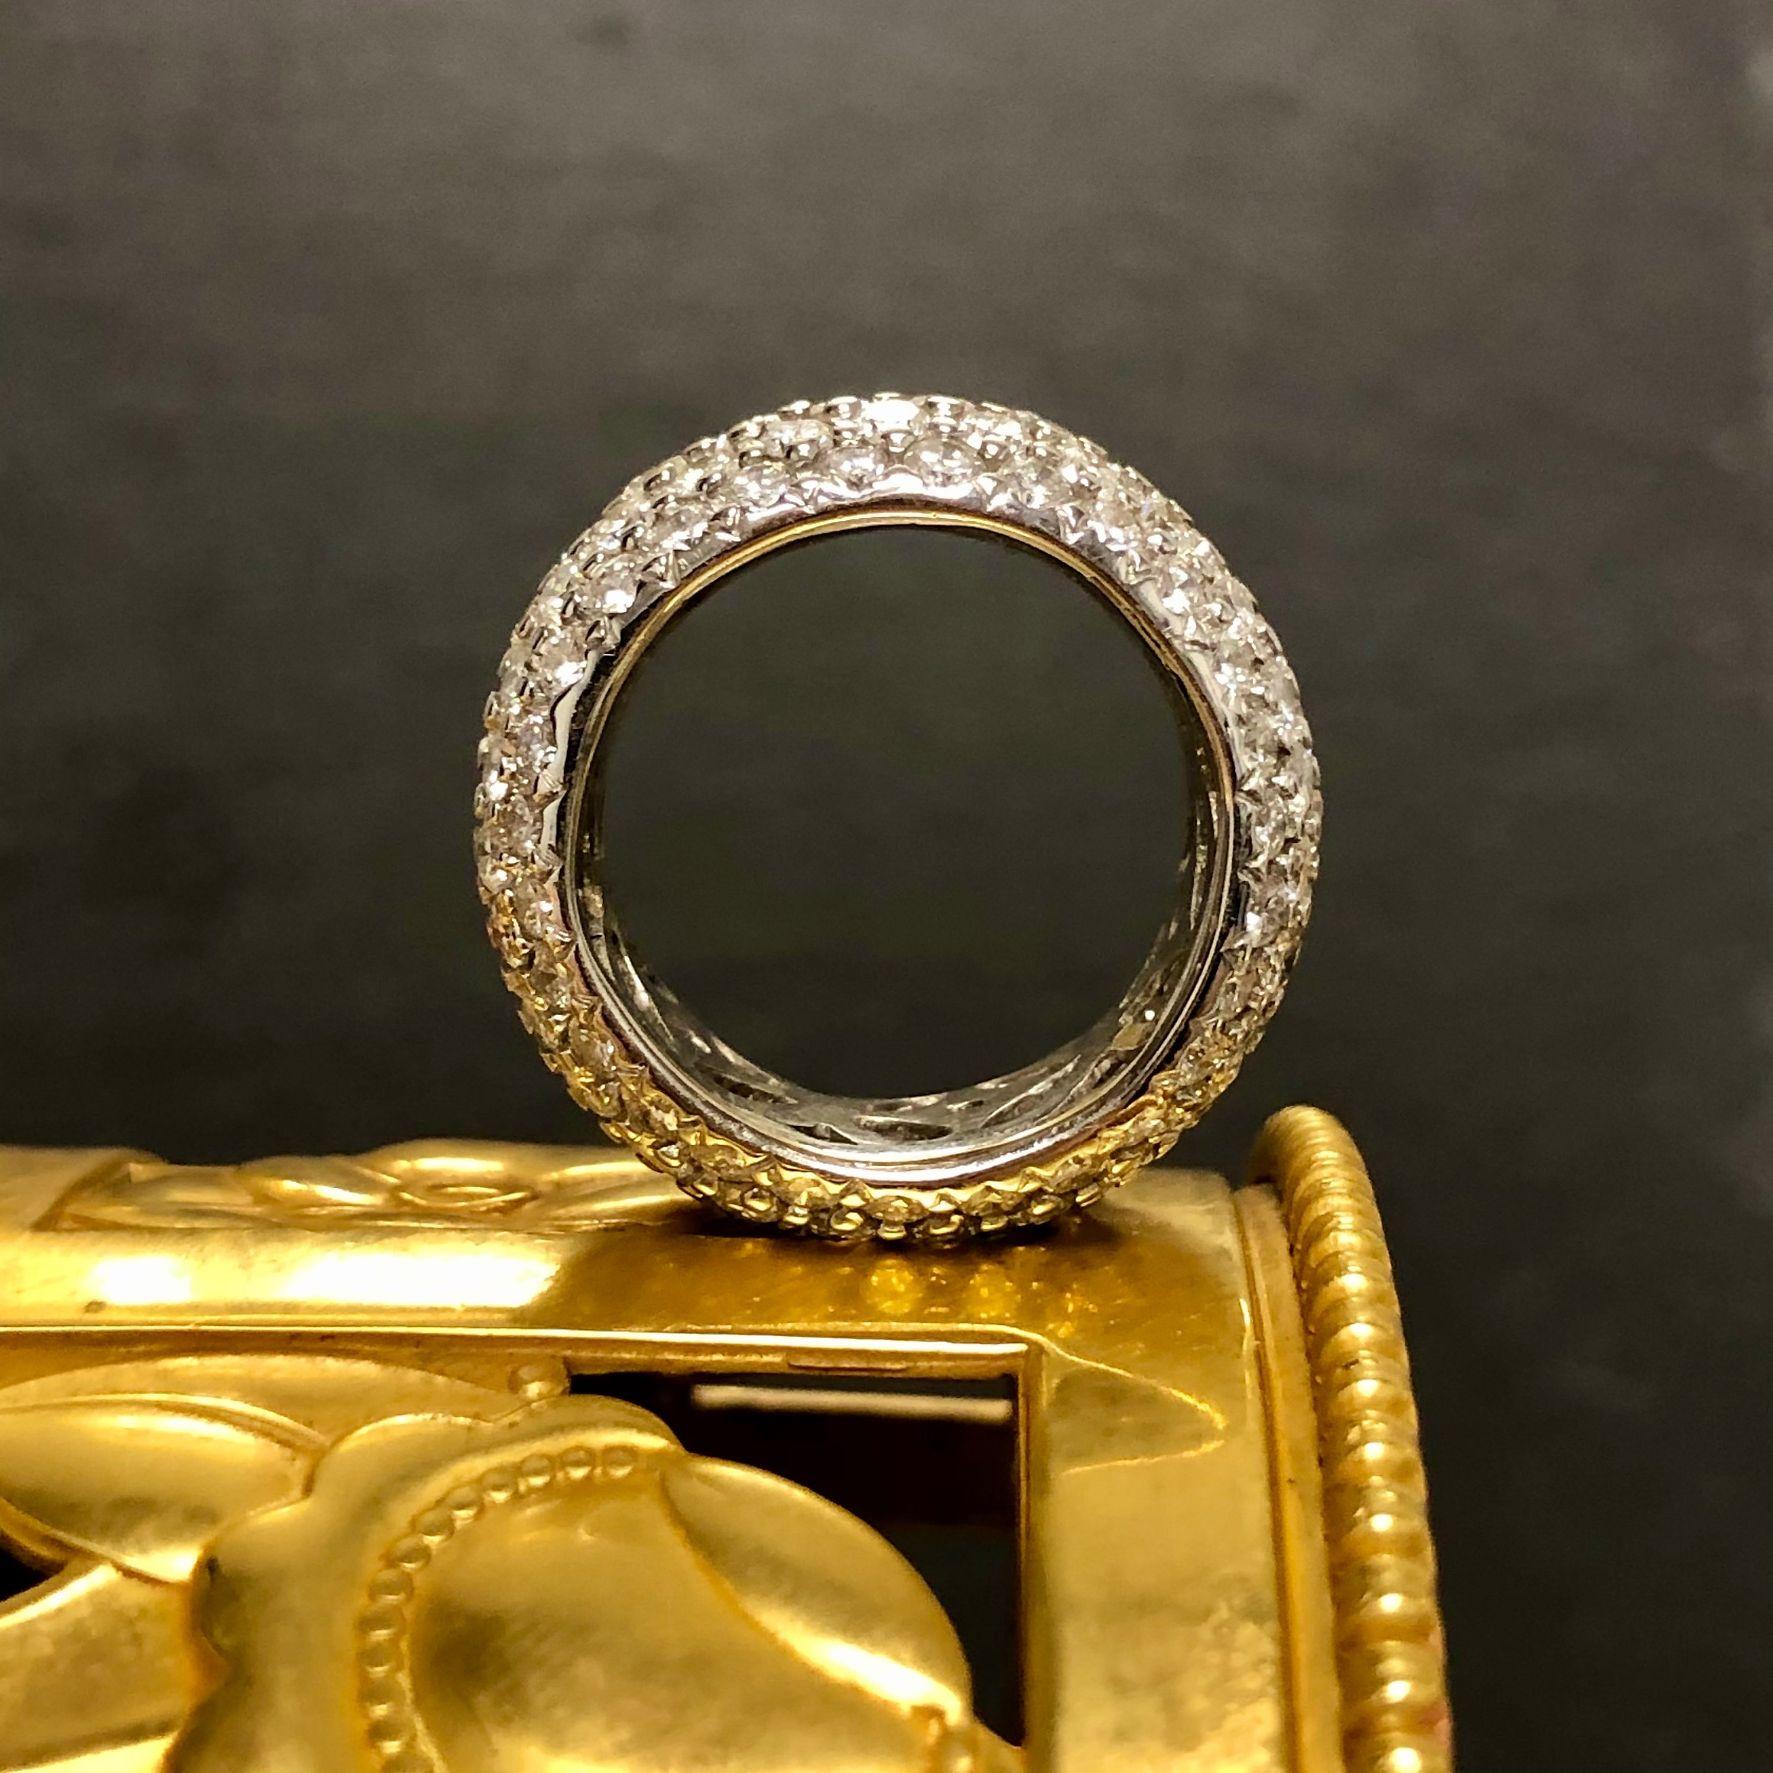 A fantastic wide band done in 18K white gold pavé set with larger diamonds all the way around and edge to edge. Total approximate diamond weight is 8.10cttw and all stones are G-I in color and Vs2-Si1 in clarity.

Dimensions/Weight
Measures 10.20mm